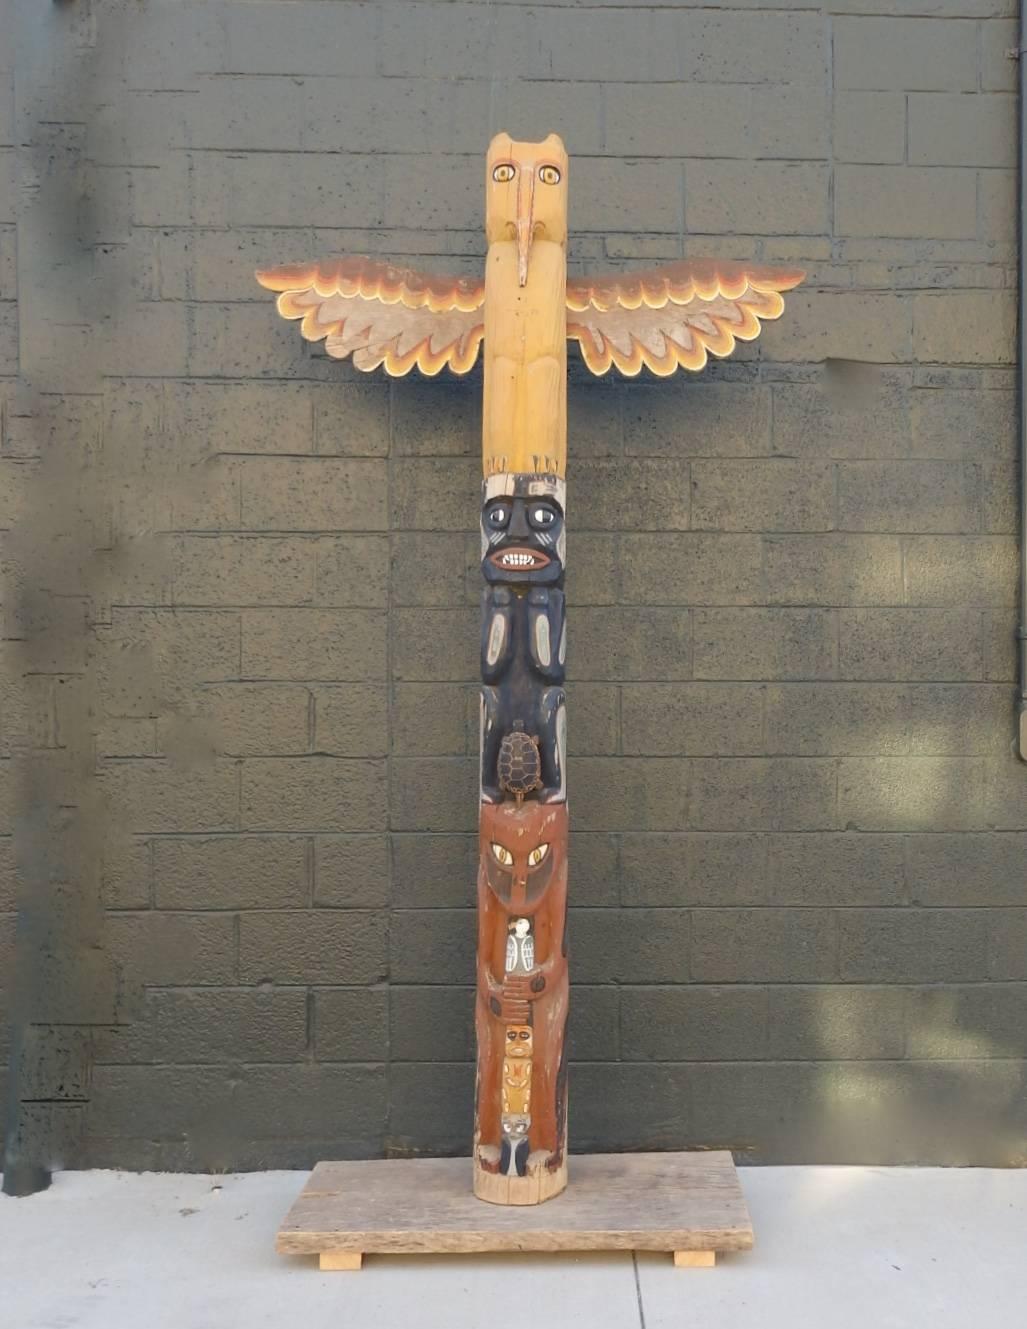 Hand-carved TOTEM pole purchased in Detroit. Possibly northern Michigan origin. Older mounting on boards.